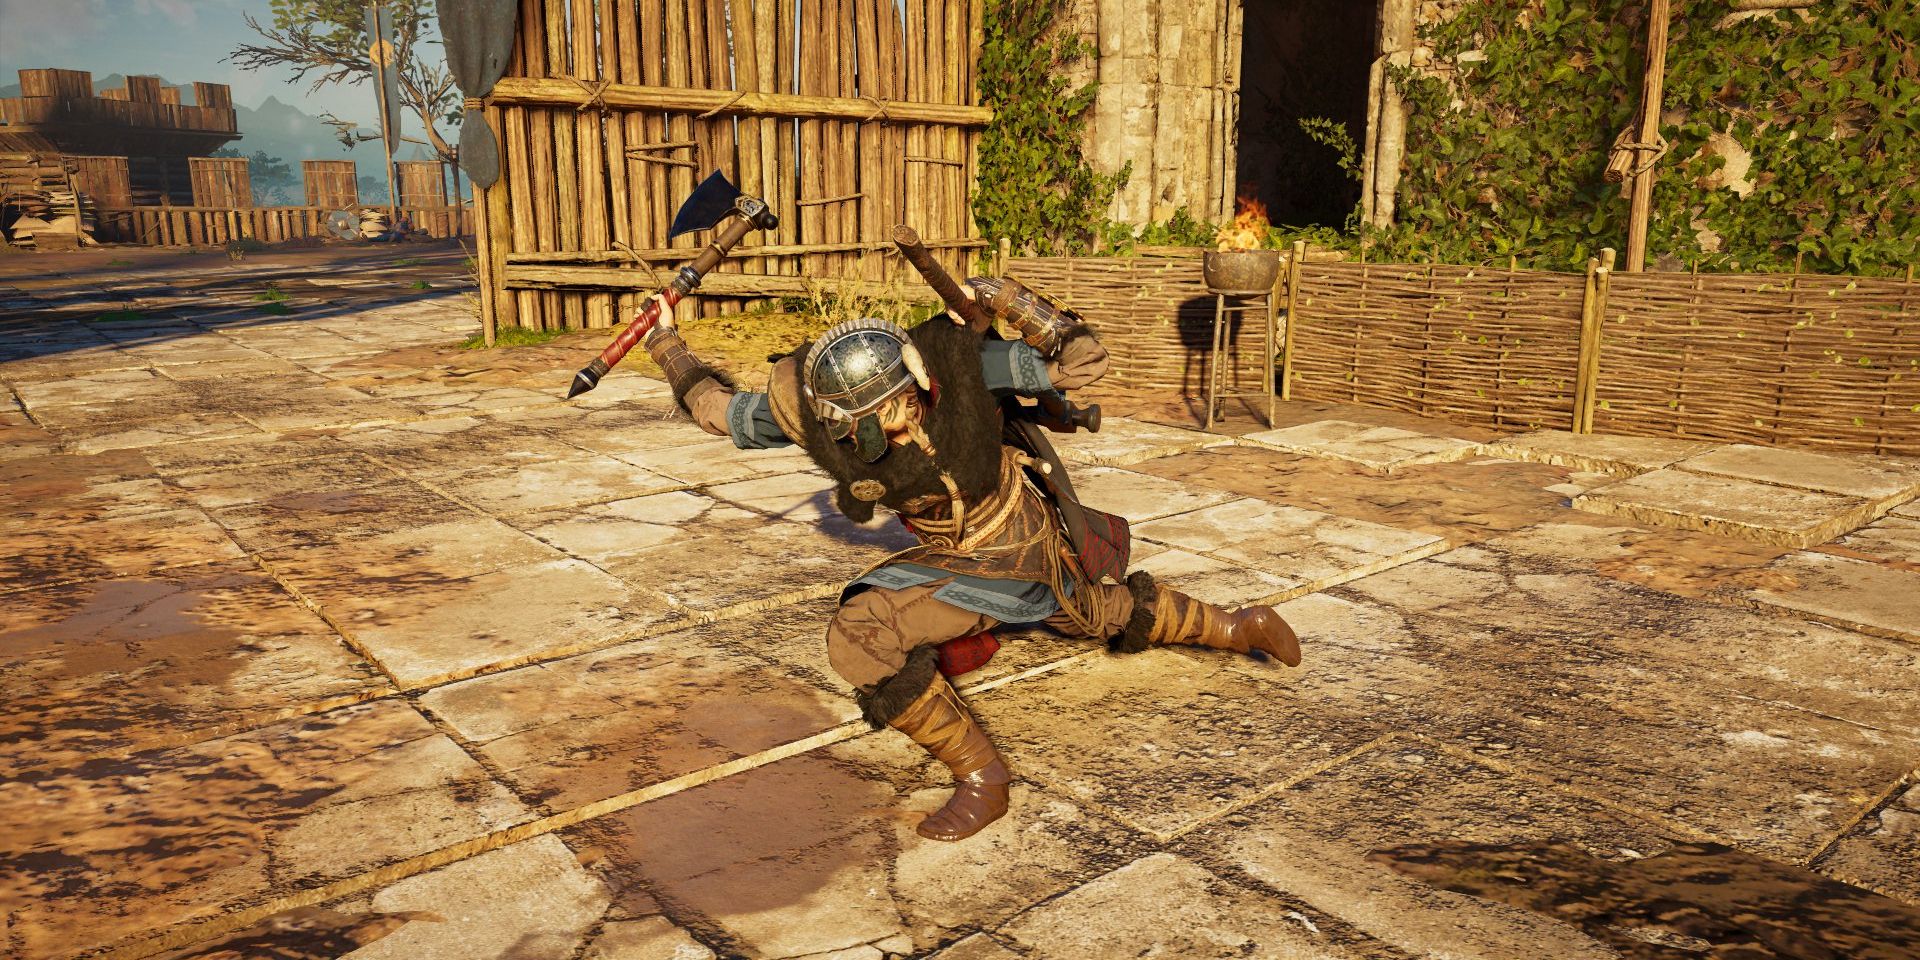 lunging in a light attack with a bearded axe.